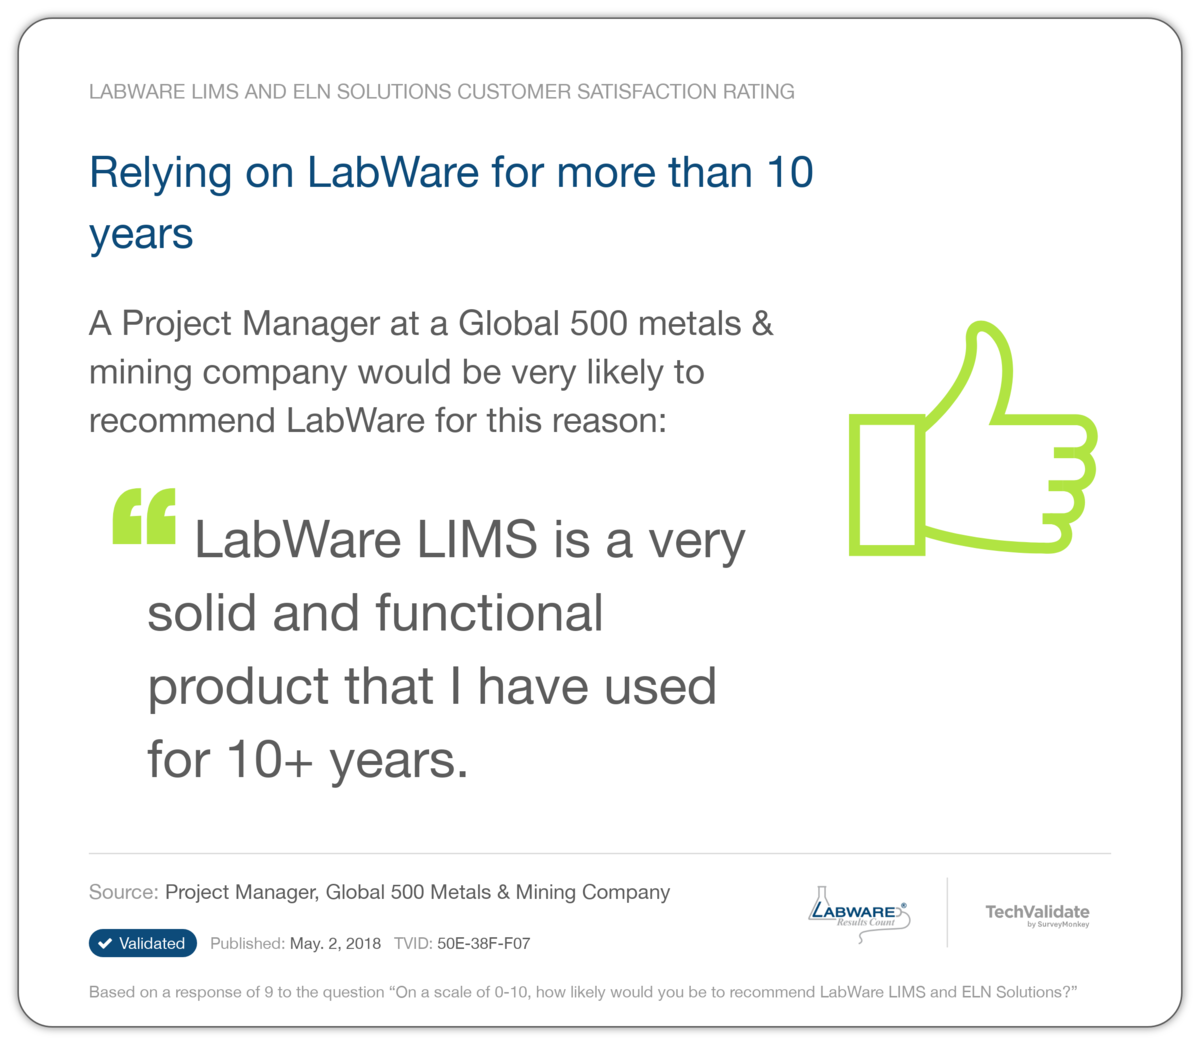 Relying on LabWare for more than 10 years